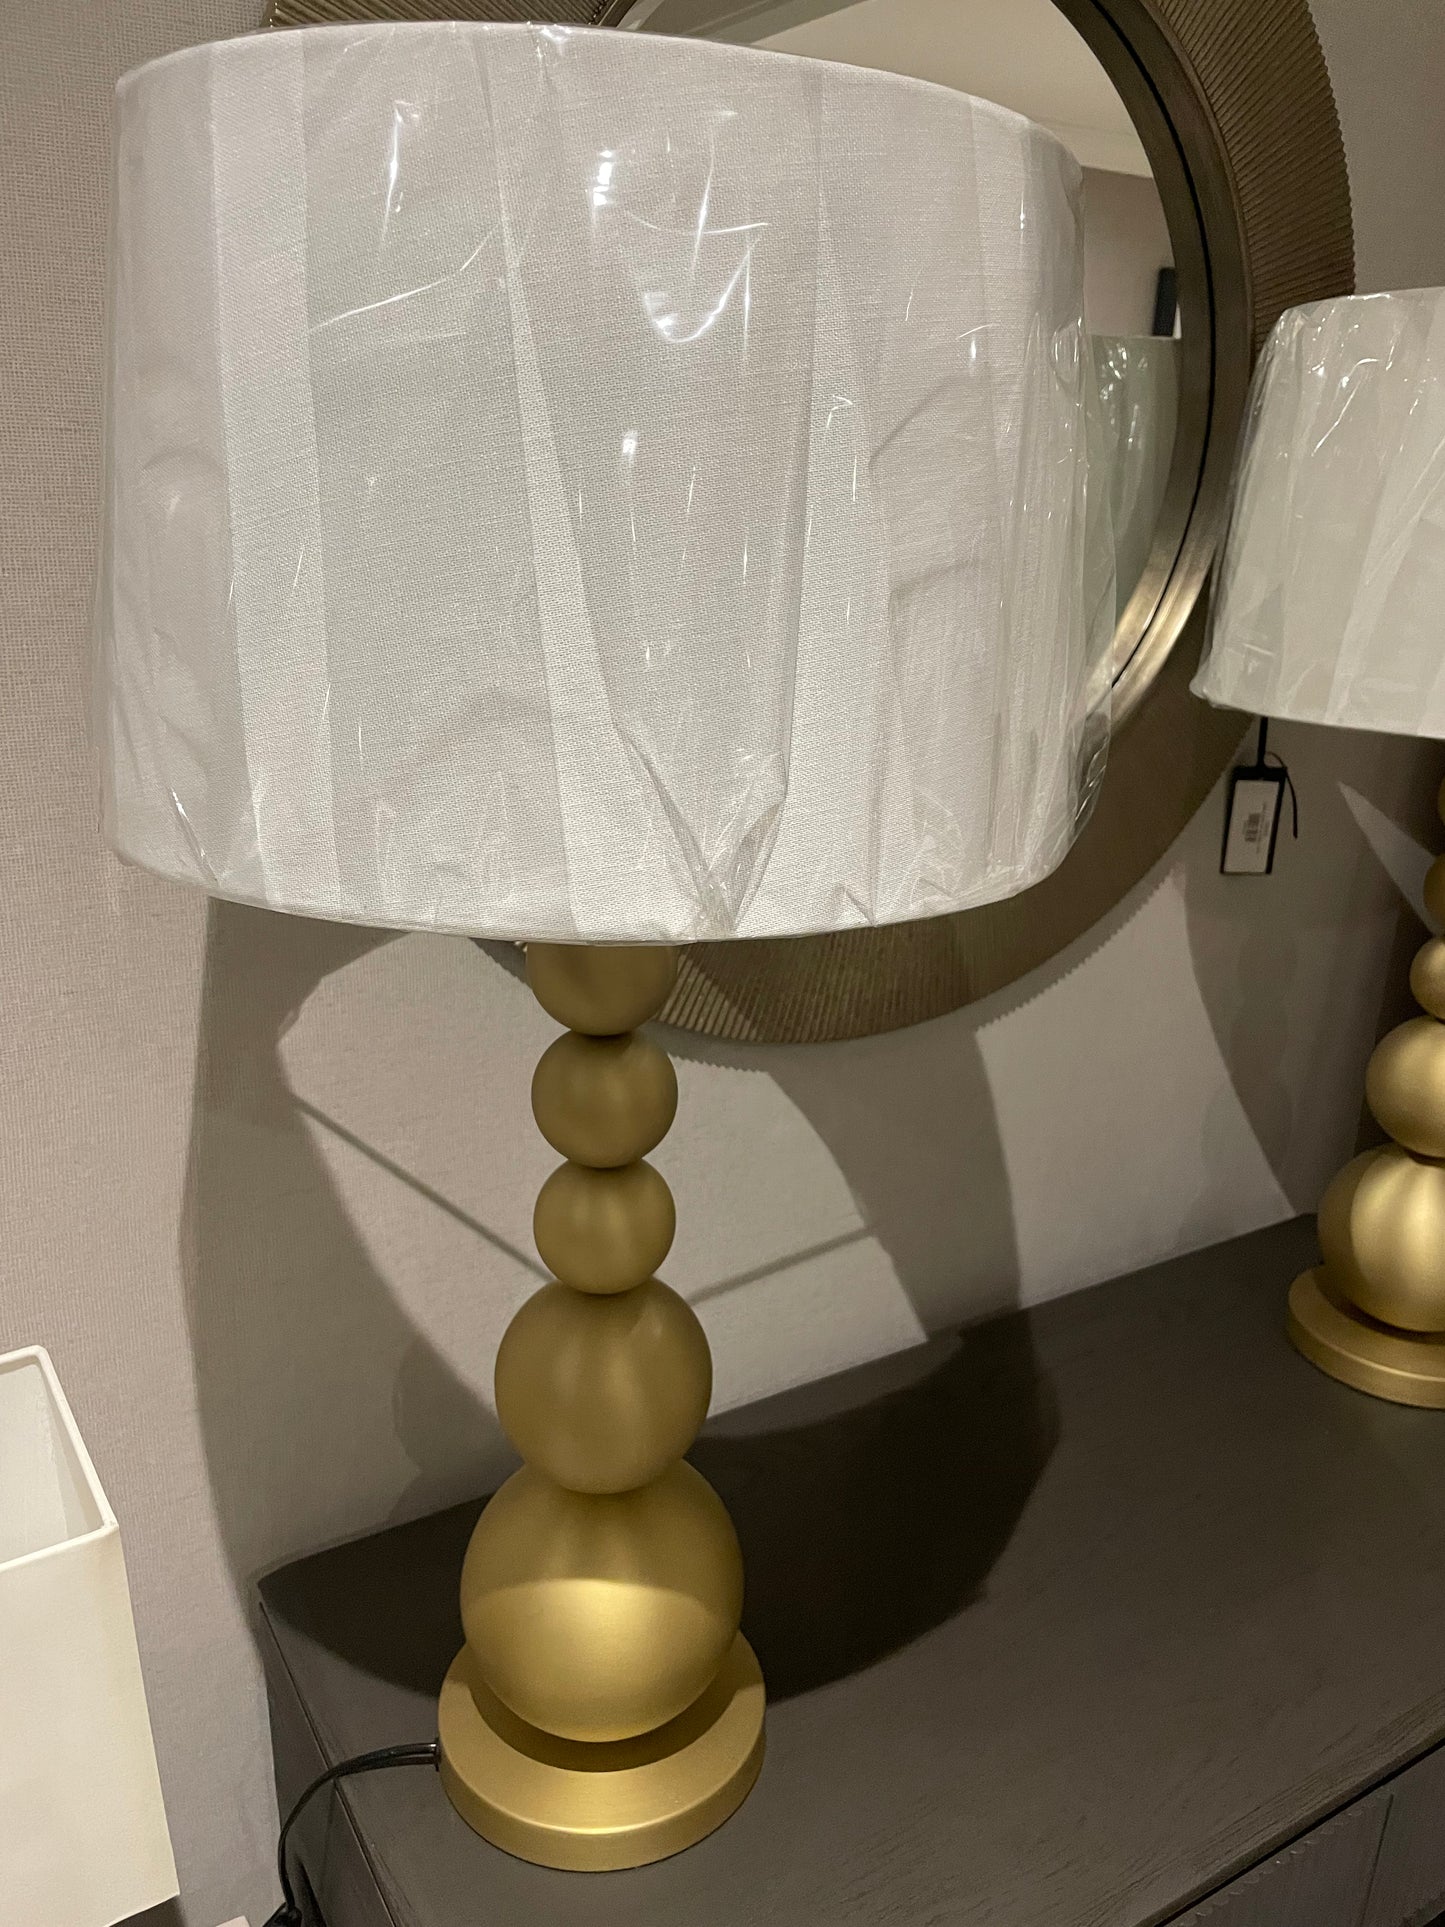 Senna stacked balls  gold lamp reduced for Instore collection only